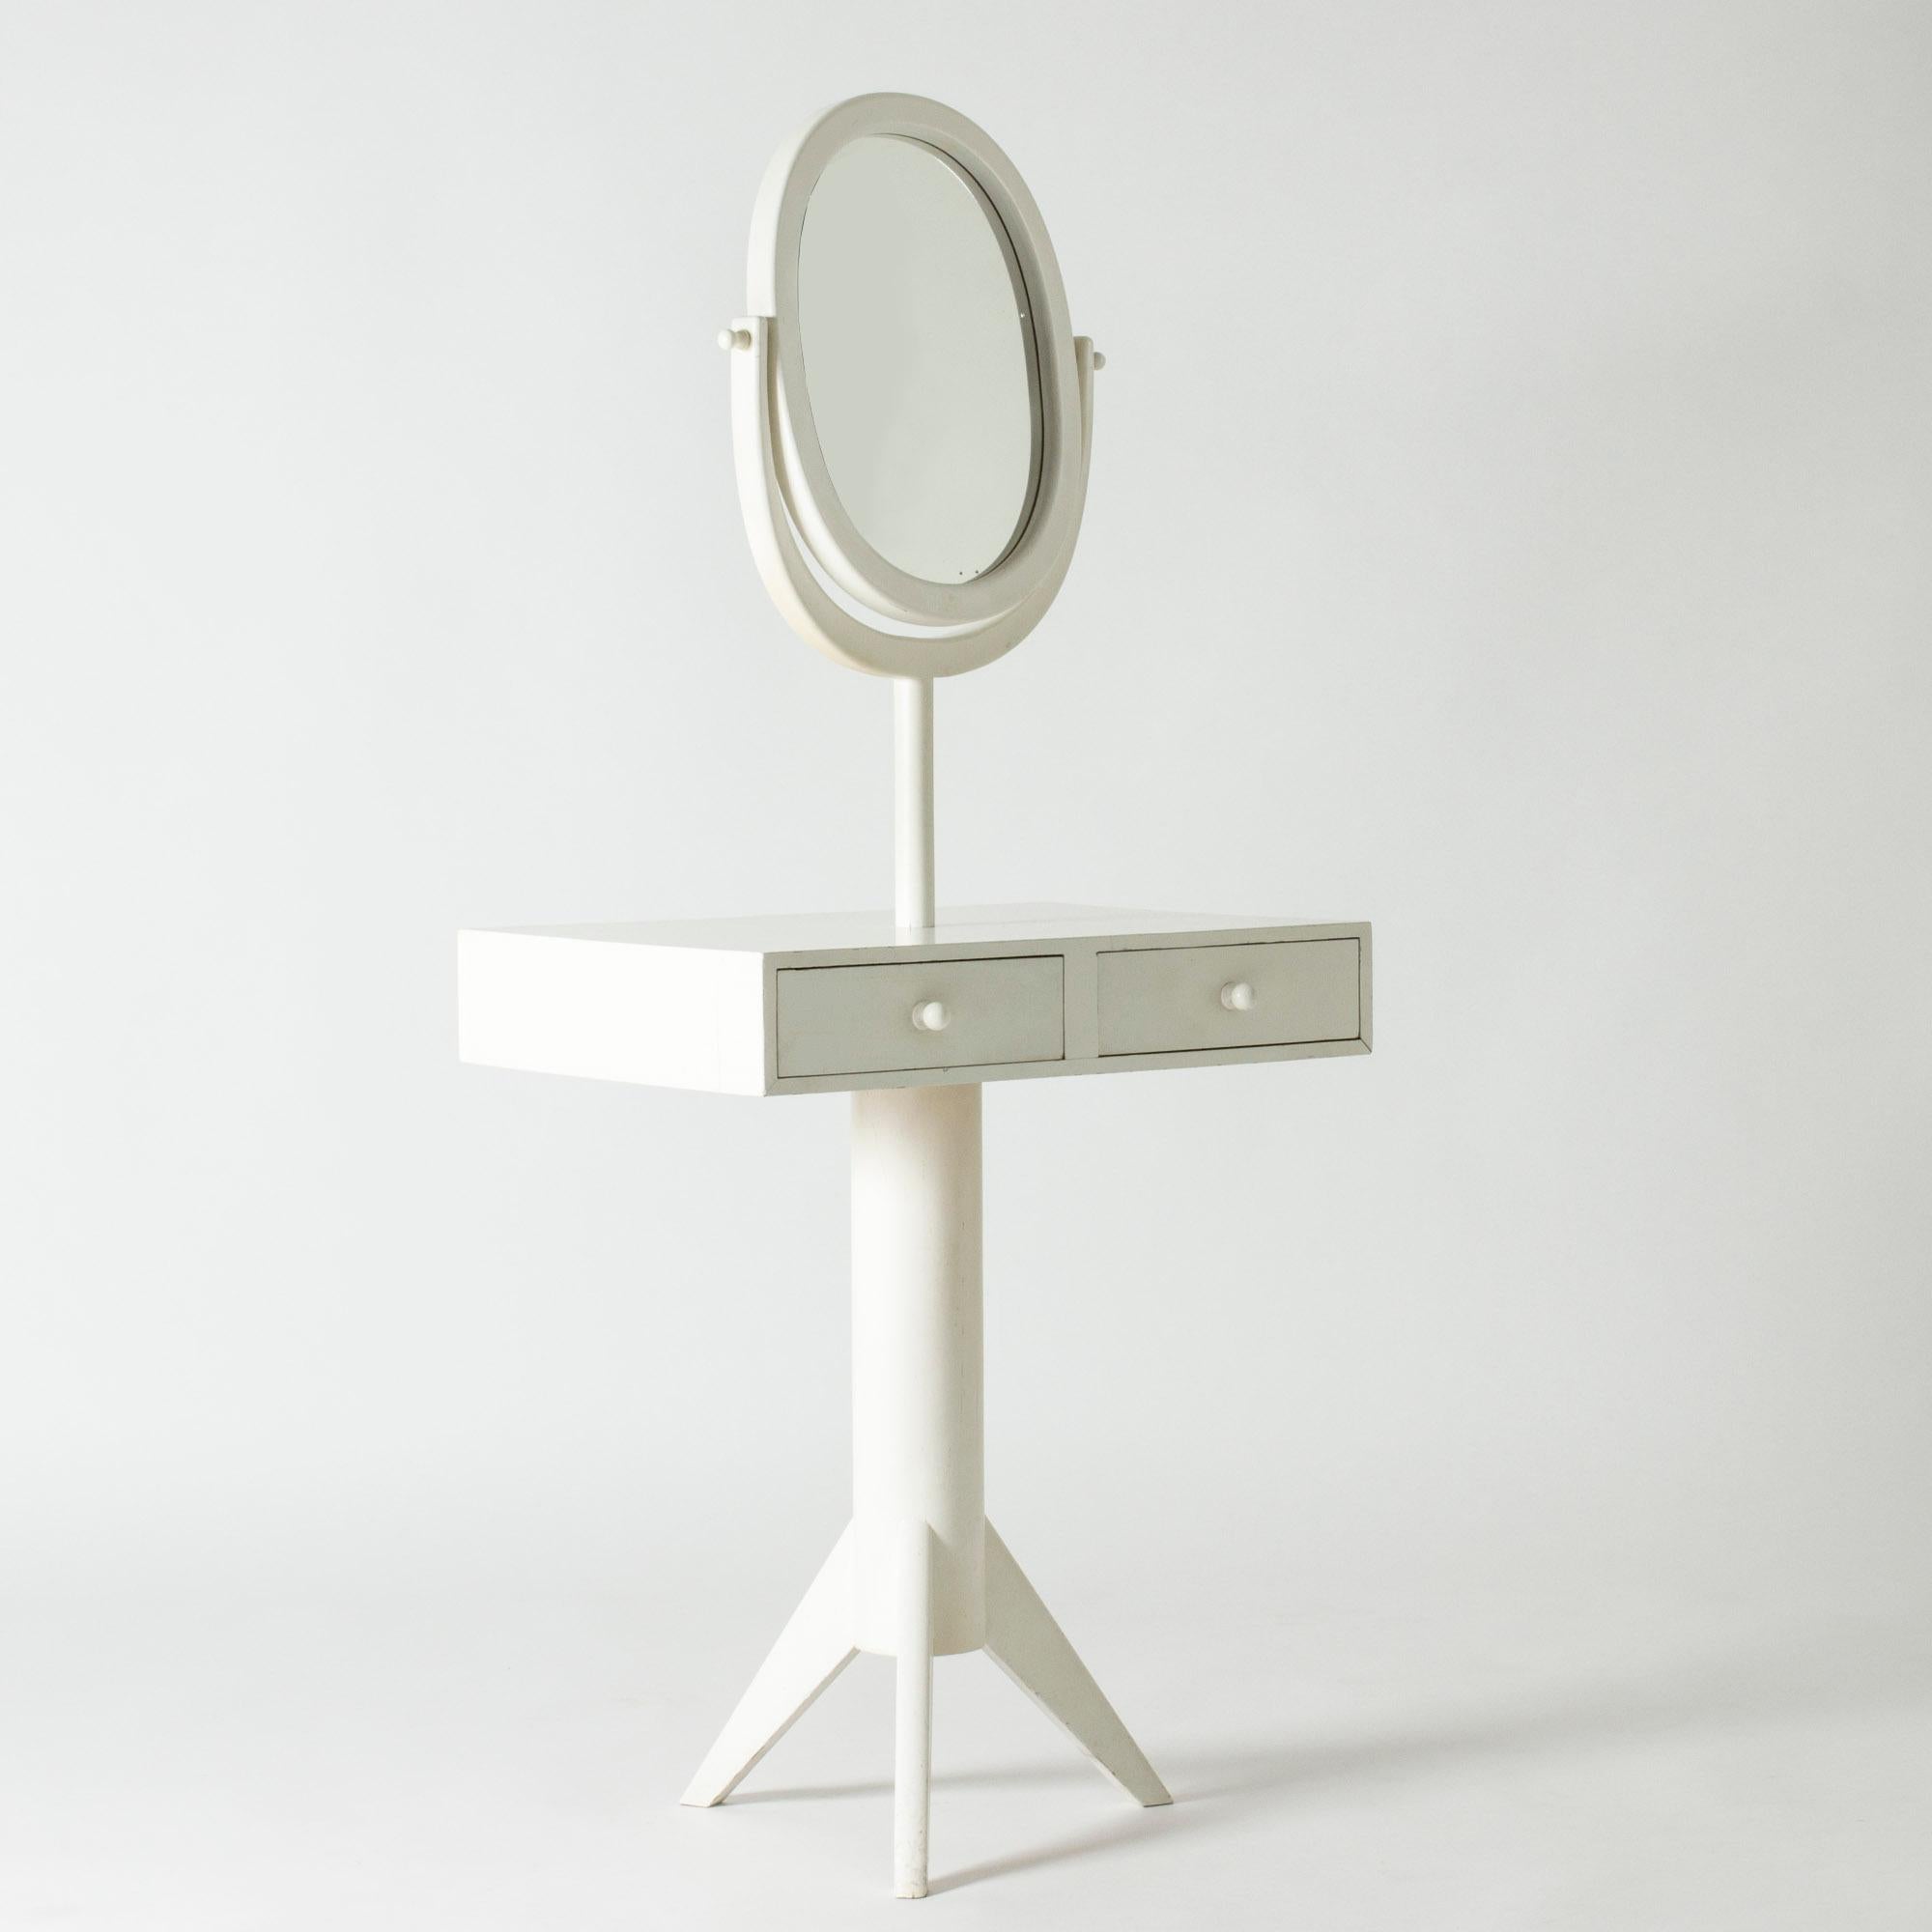 Lovely dressing table by Erik Höglund, in a whimsical design with smooth lines. The table top stands on a piedestal base, cute knobs on the drawers and on the sides of the mirror.

Erik Höglund was one of Sweden’s foremost glass artists, whose